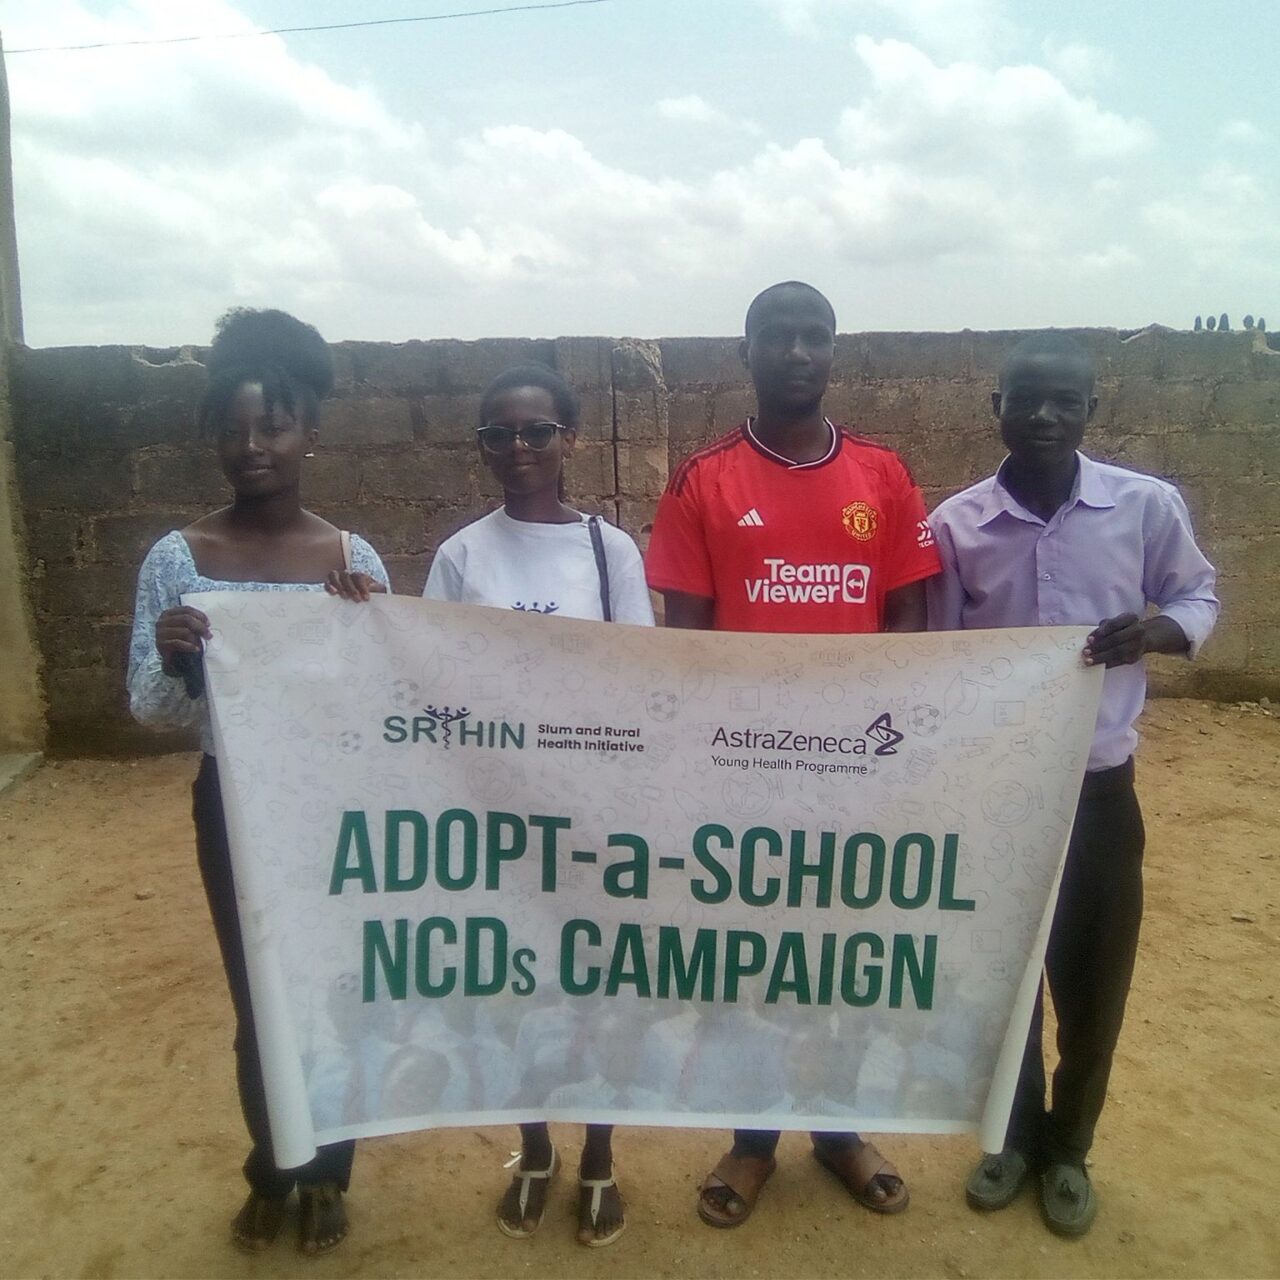 Haggai Elisha: Another opportunity to raise NCDs Champions for the future